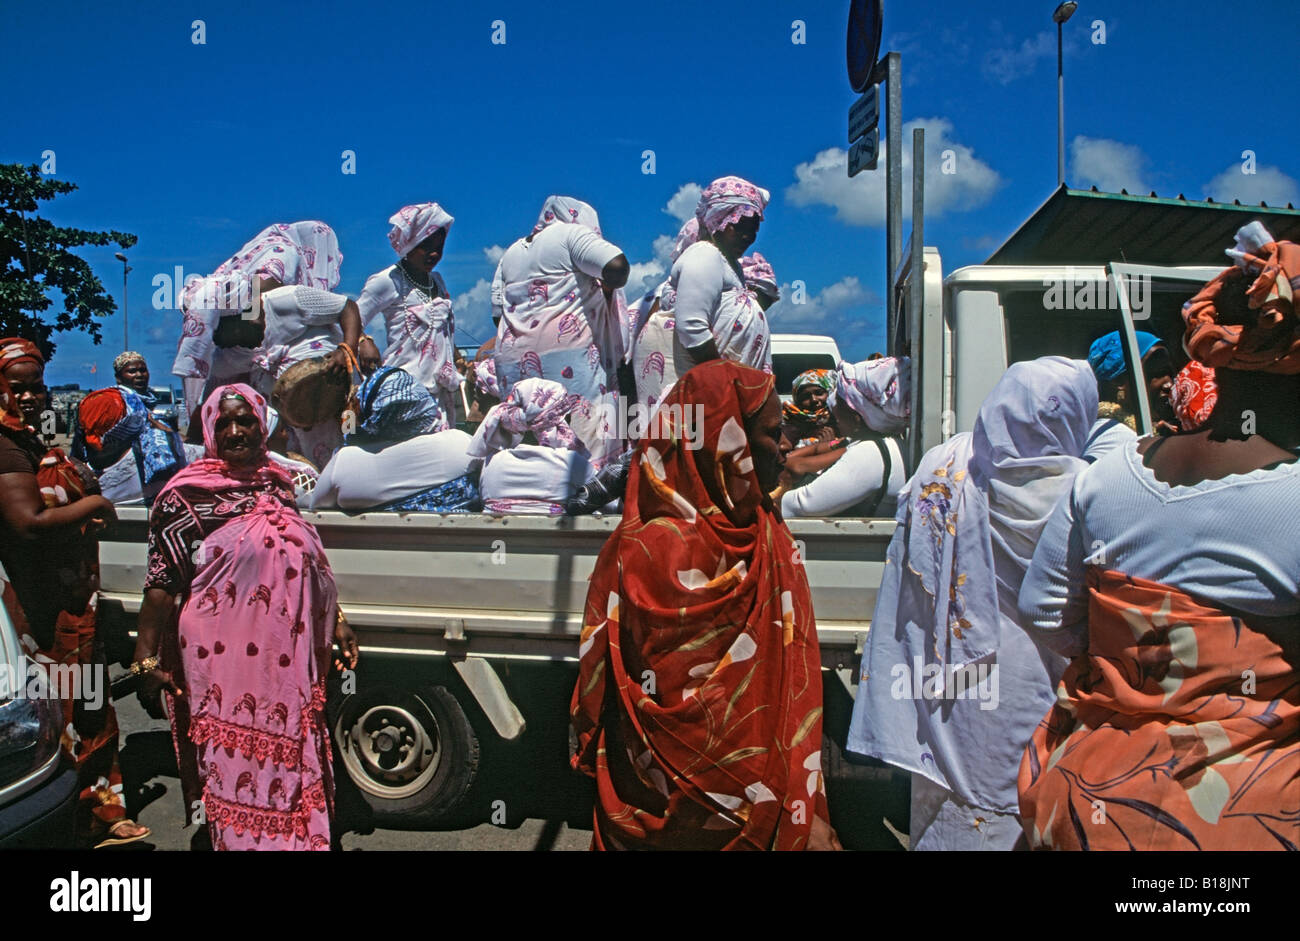 Villagers on Mayotte island Indian Ocean celebrating their return from the Hajj Mecca Stock Photo